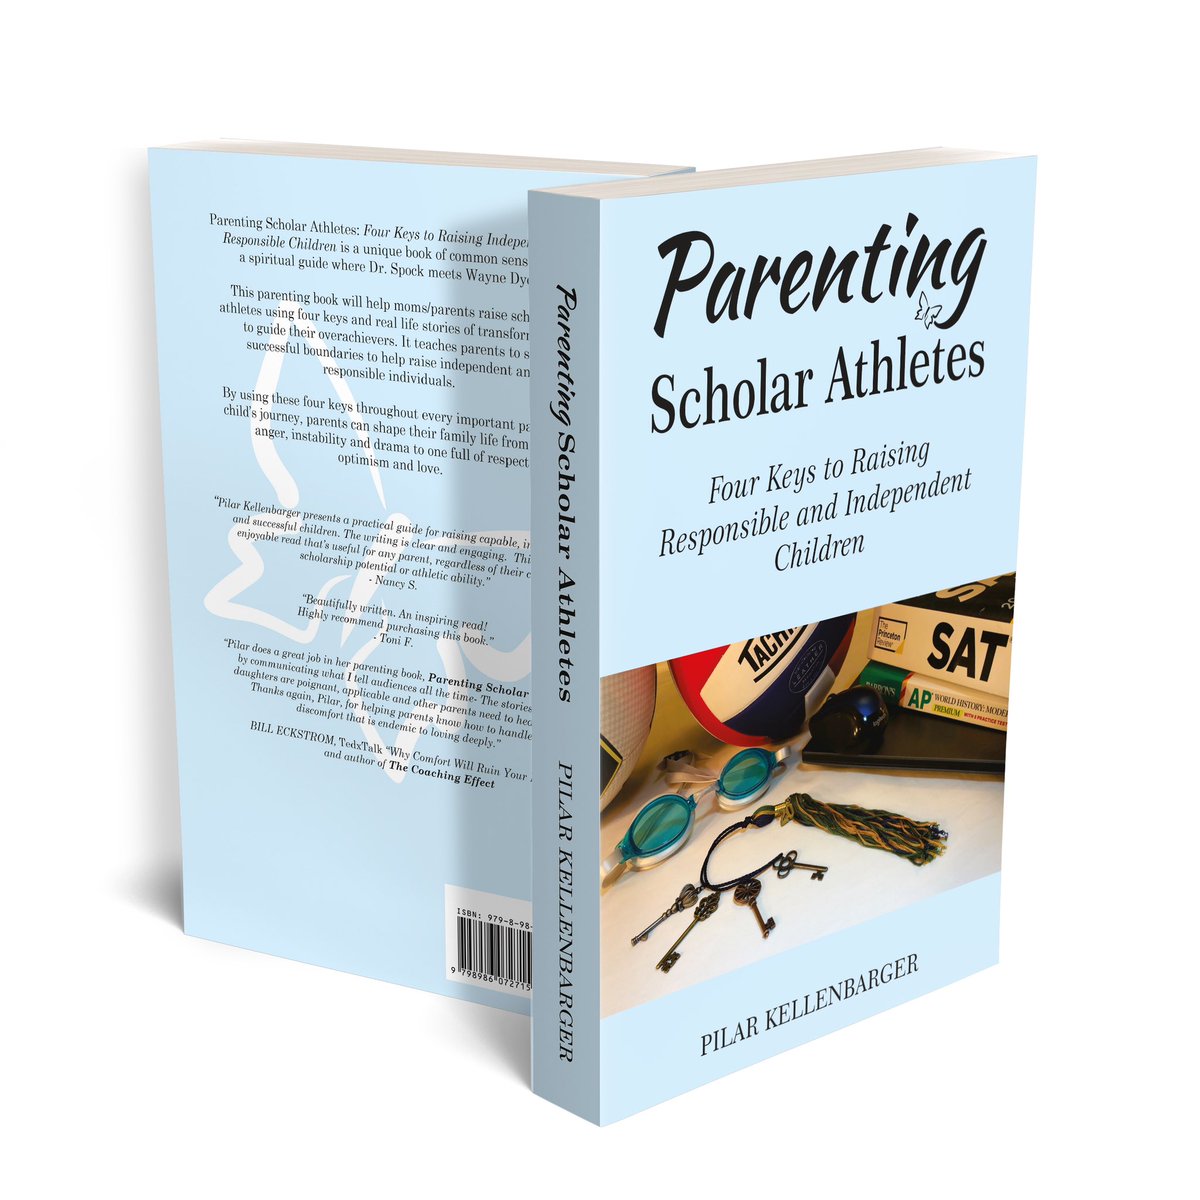 Looking for #strategies to #help your #youngstudent #athlete with #homework, technology, and being #coachable? Even chapters, Ch 5-From One Mother to Another, to #helpmoms on this #scholarathlete journey. amazon.com/dp/0578909499 
Hope I can help. ♥️